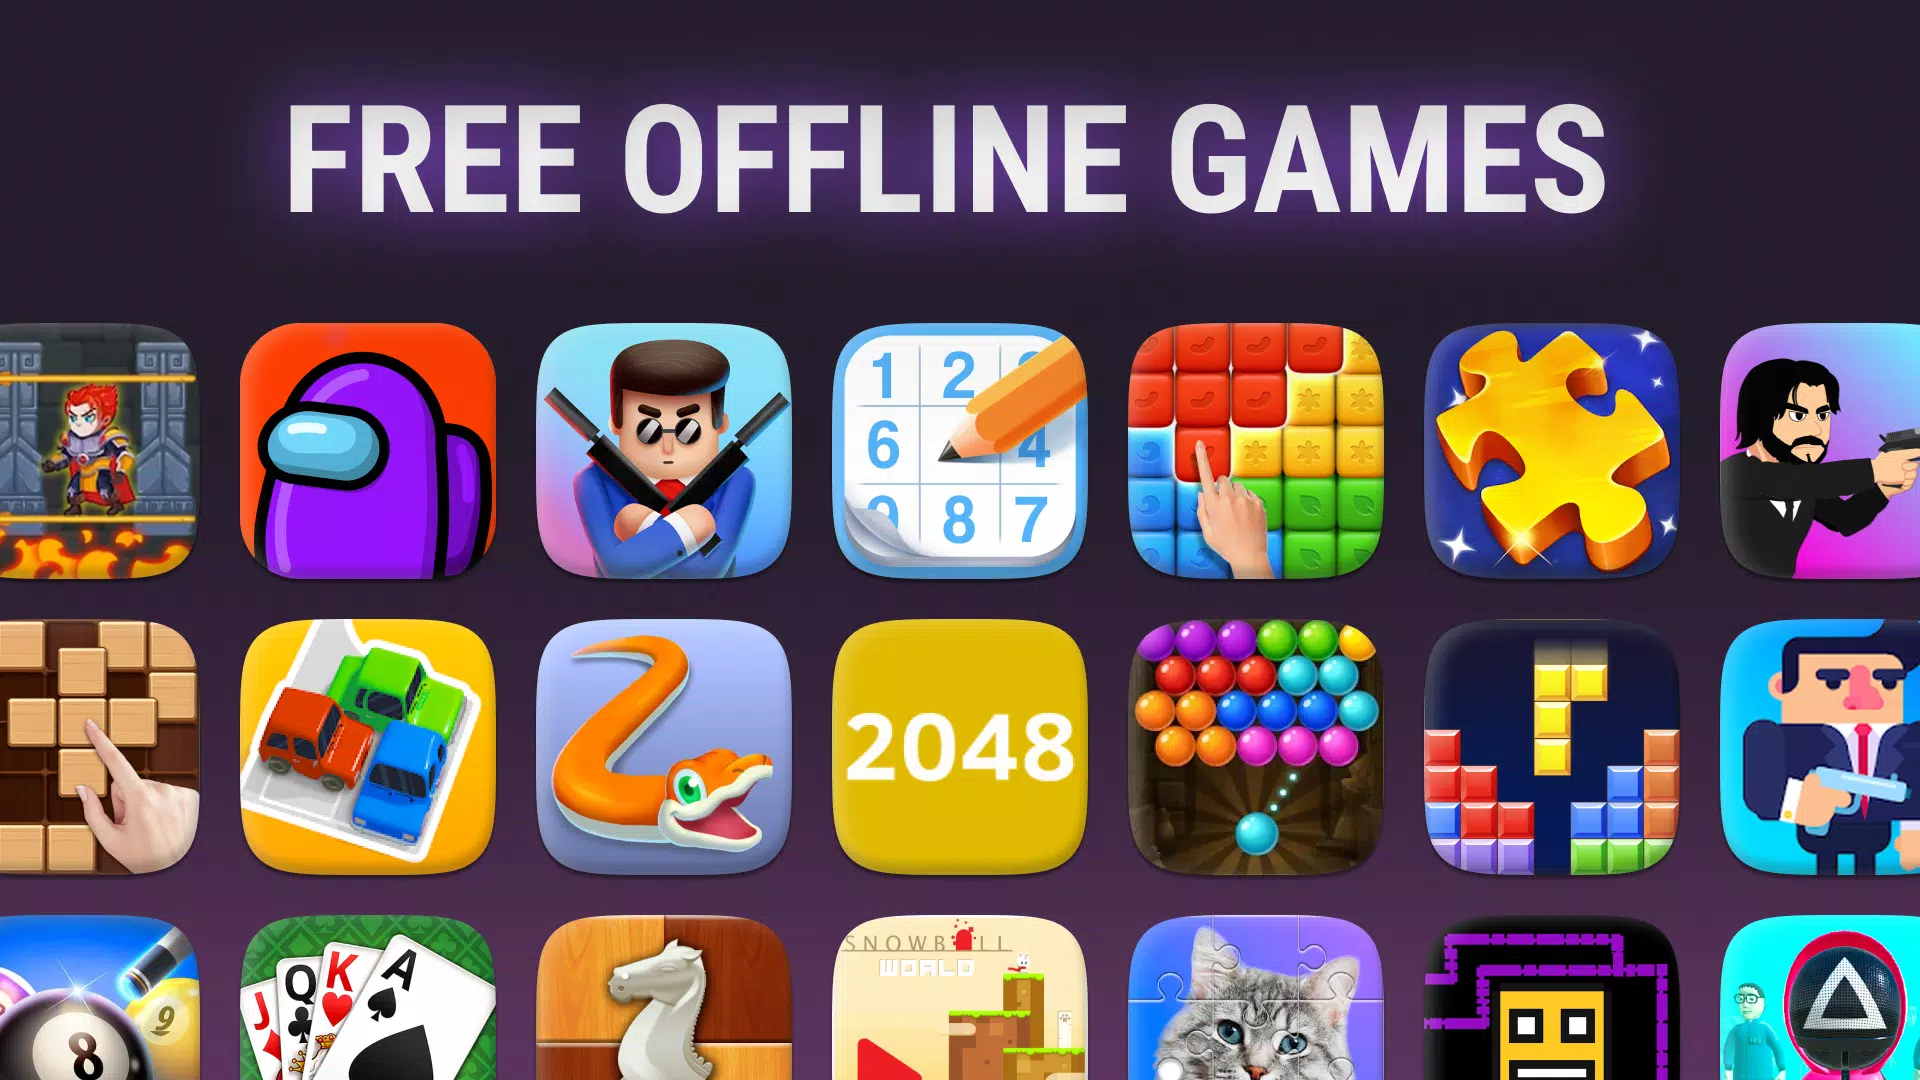 Top 50 Free Offline Games For Android & iOS